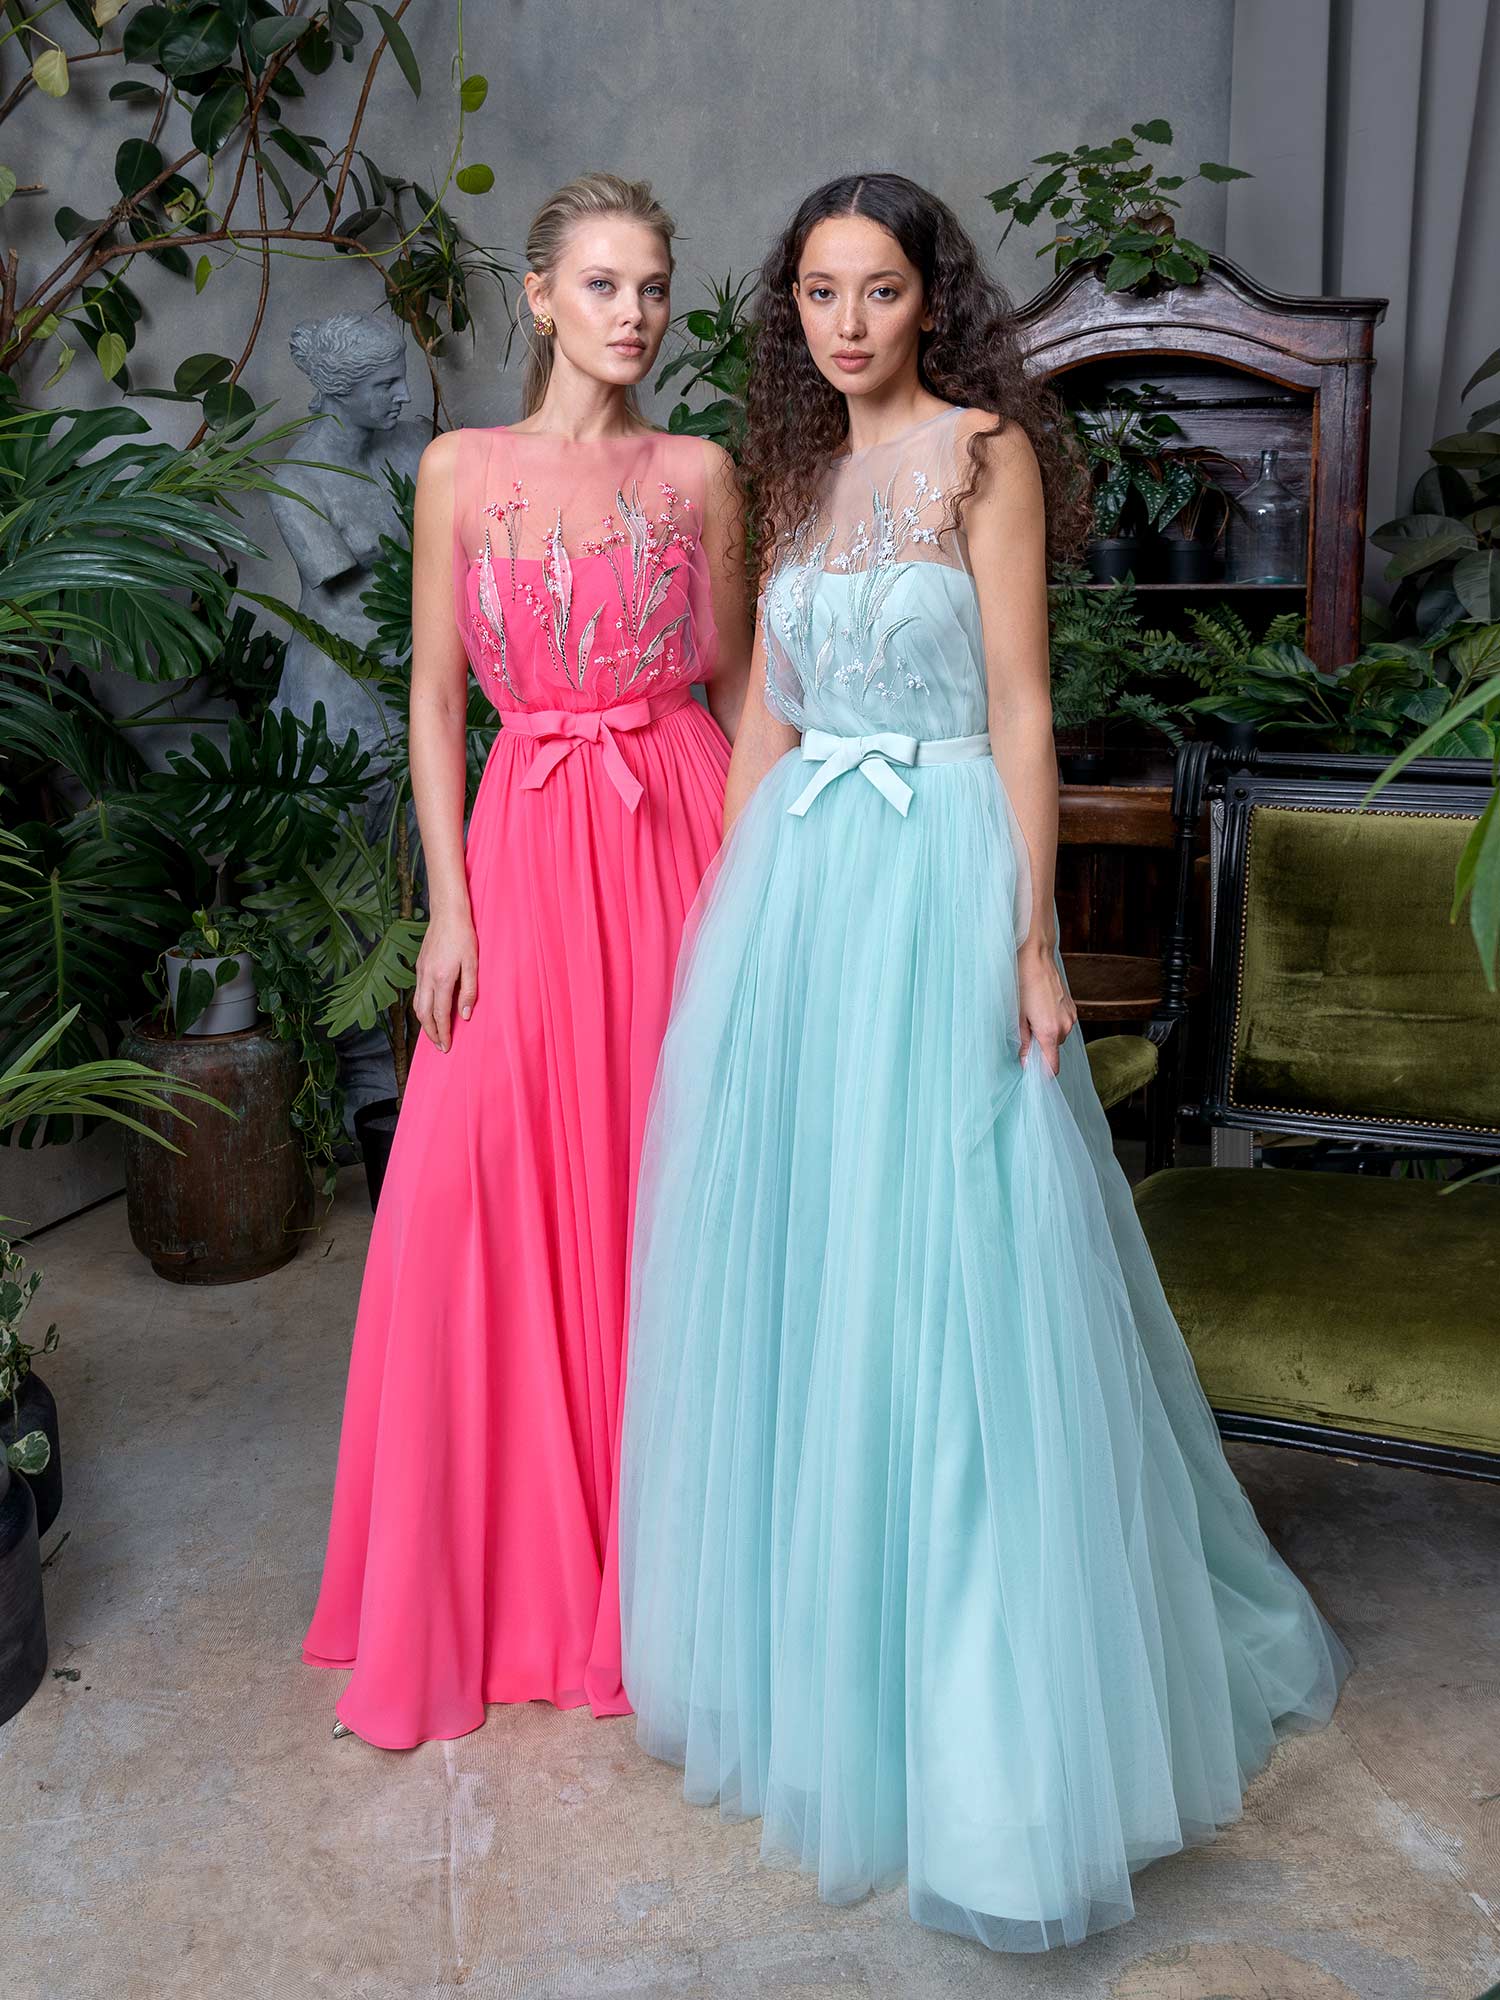 Style #717a, tulle evening dress with floral illusion neck bodice; Style #717b, chiffon evening gown with floral illusion neck bodice